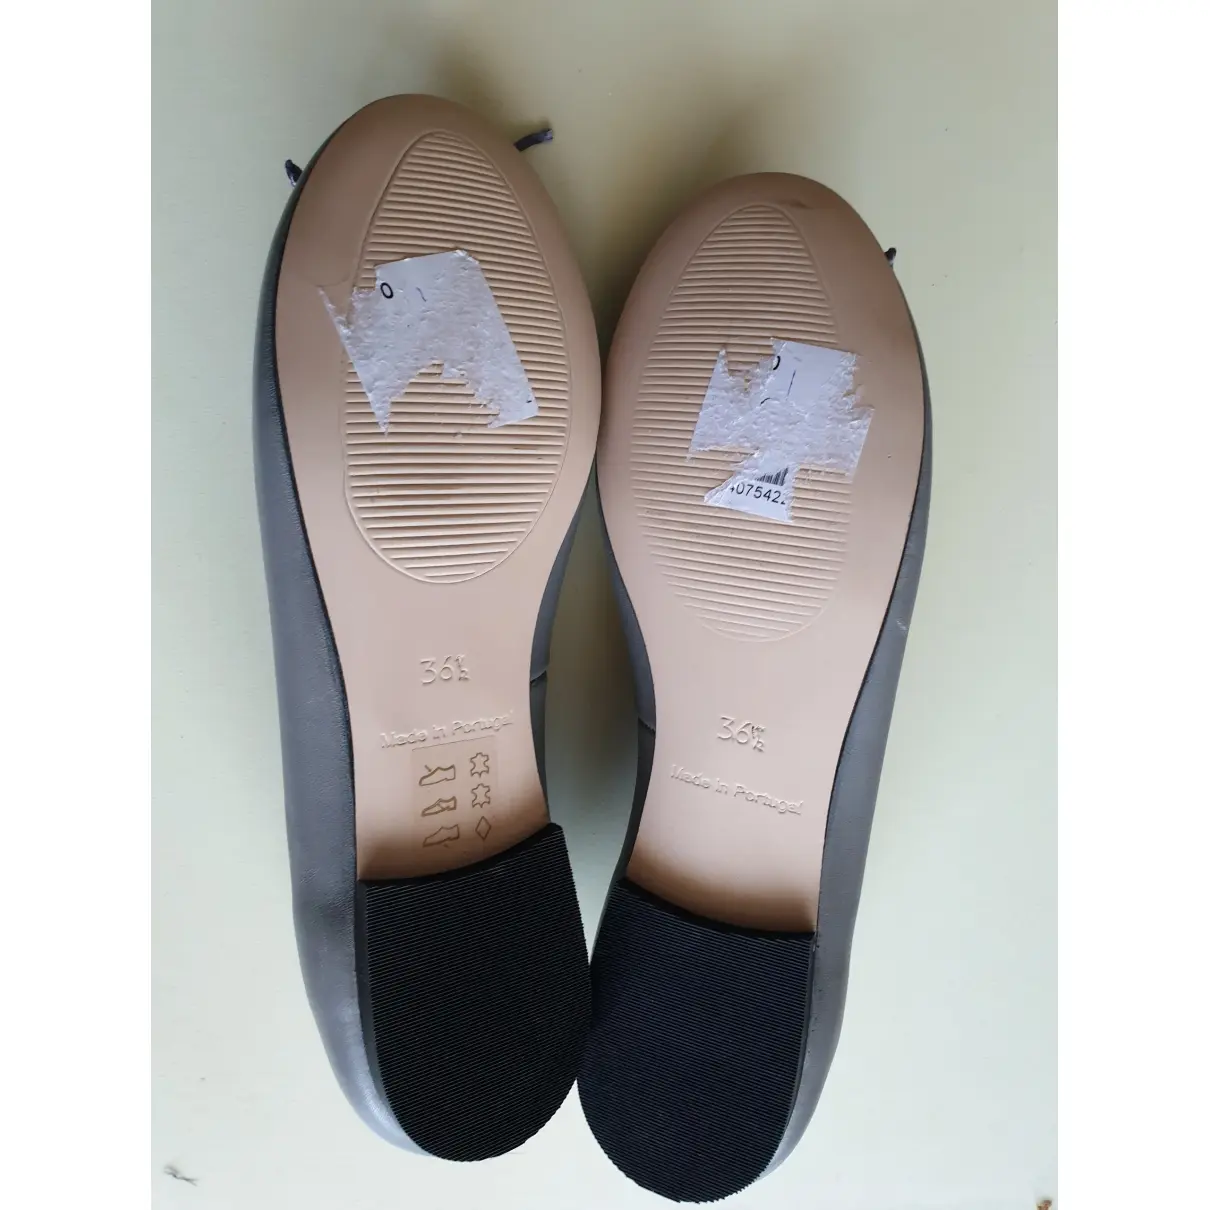 Buy French Sole Leather ballet flats online